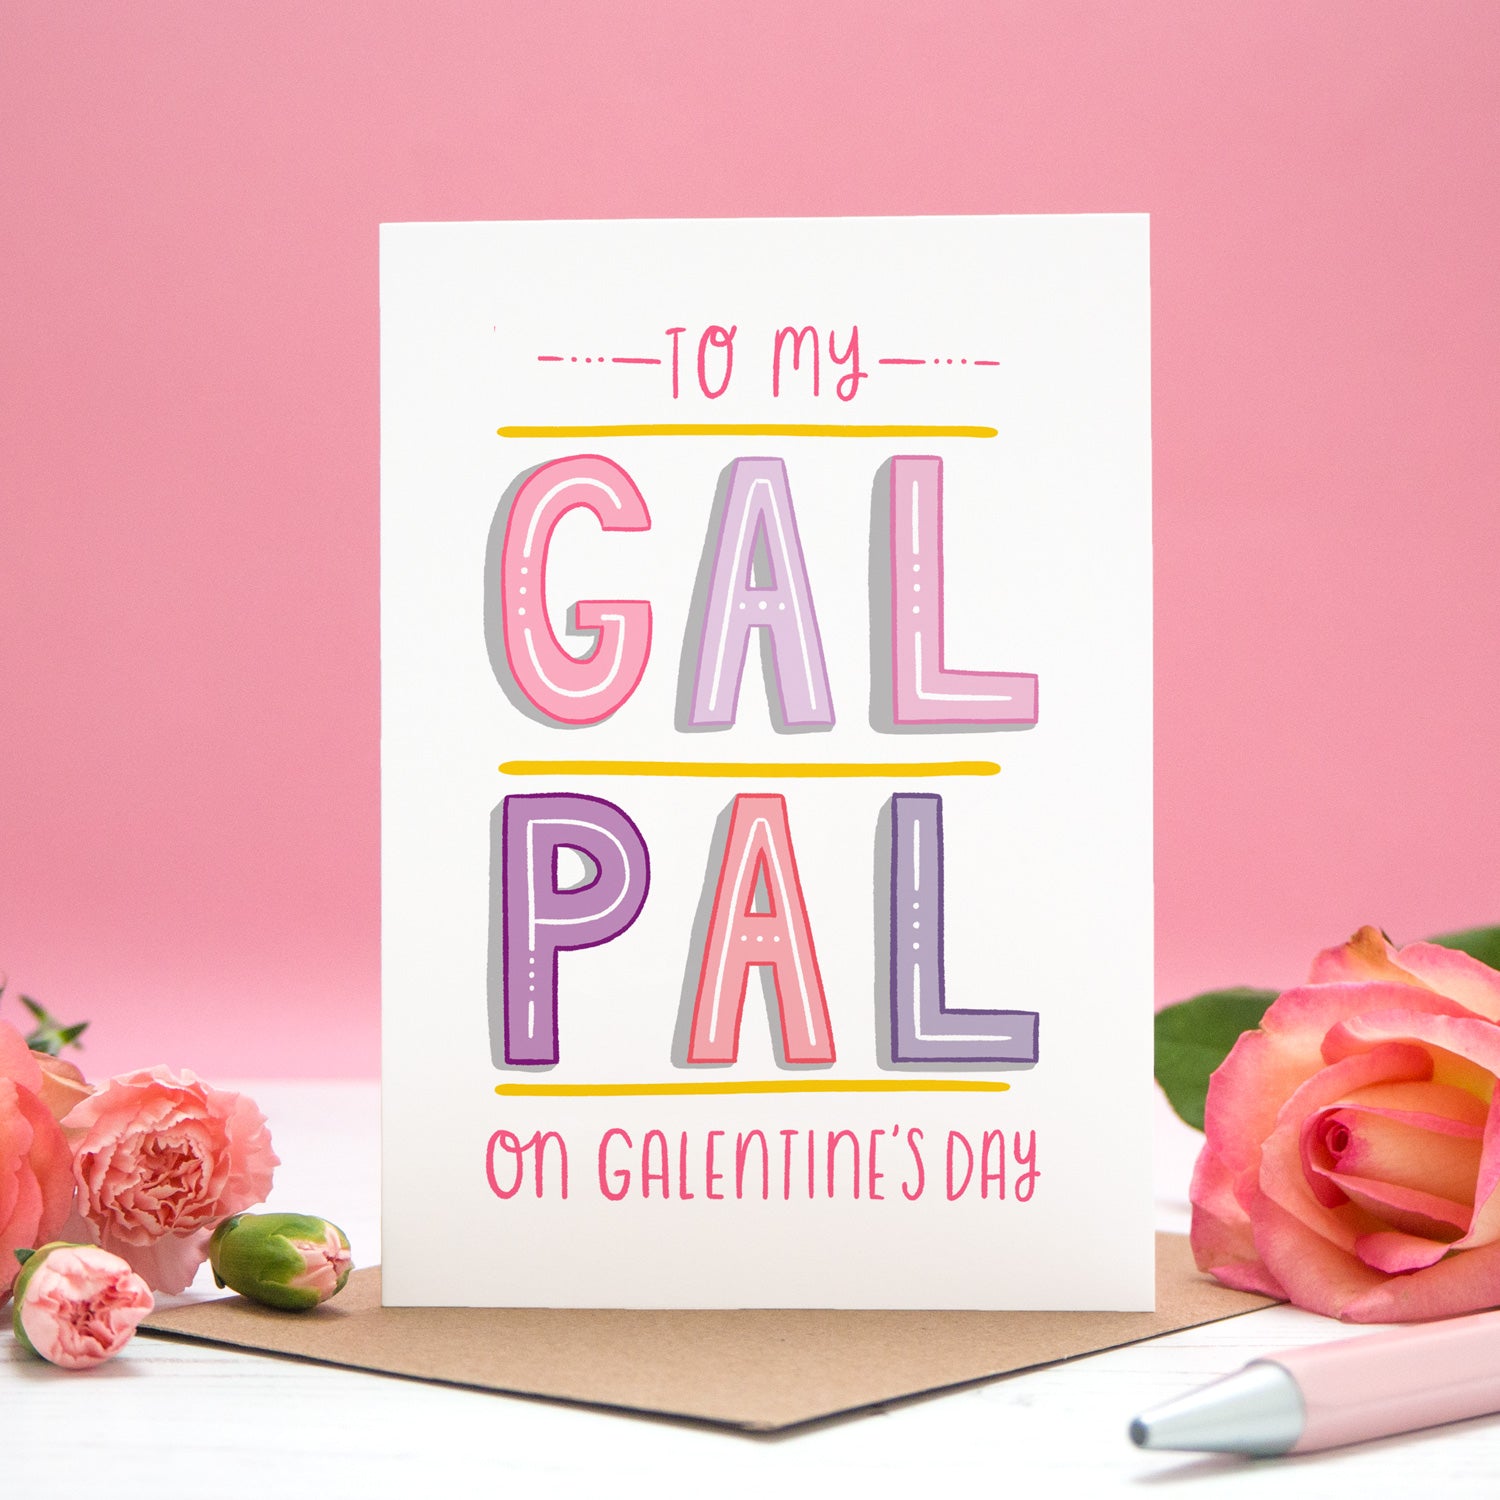 To my Gal Pal on Galentine's Day. A friendship card designed for Valentine's or Galentine's day! The image features my hand lettered card between two roses and on a pink background.